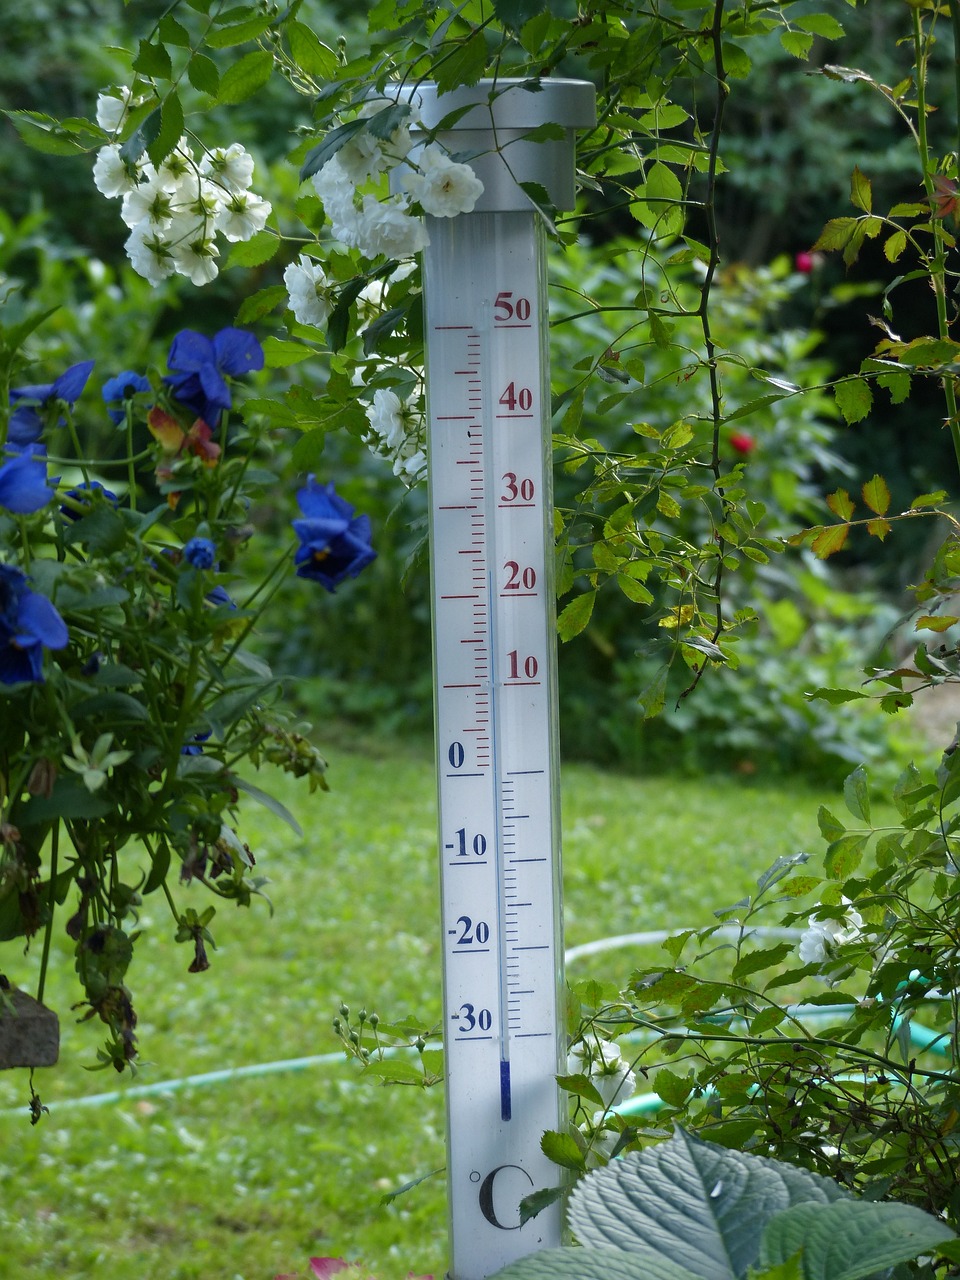 thermometer-g1031d8479_1280